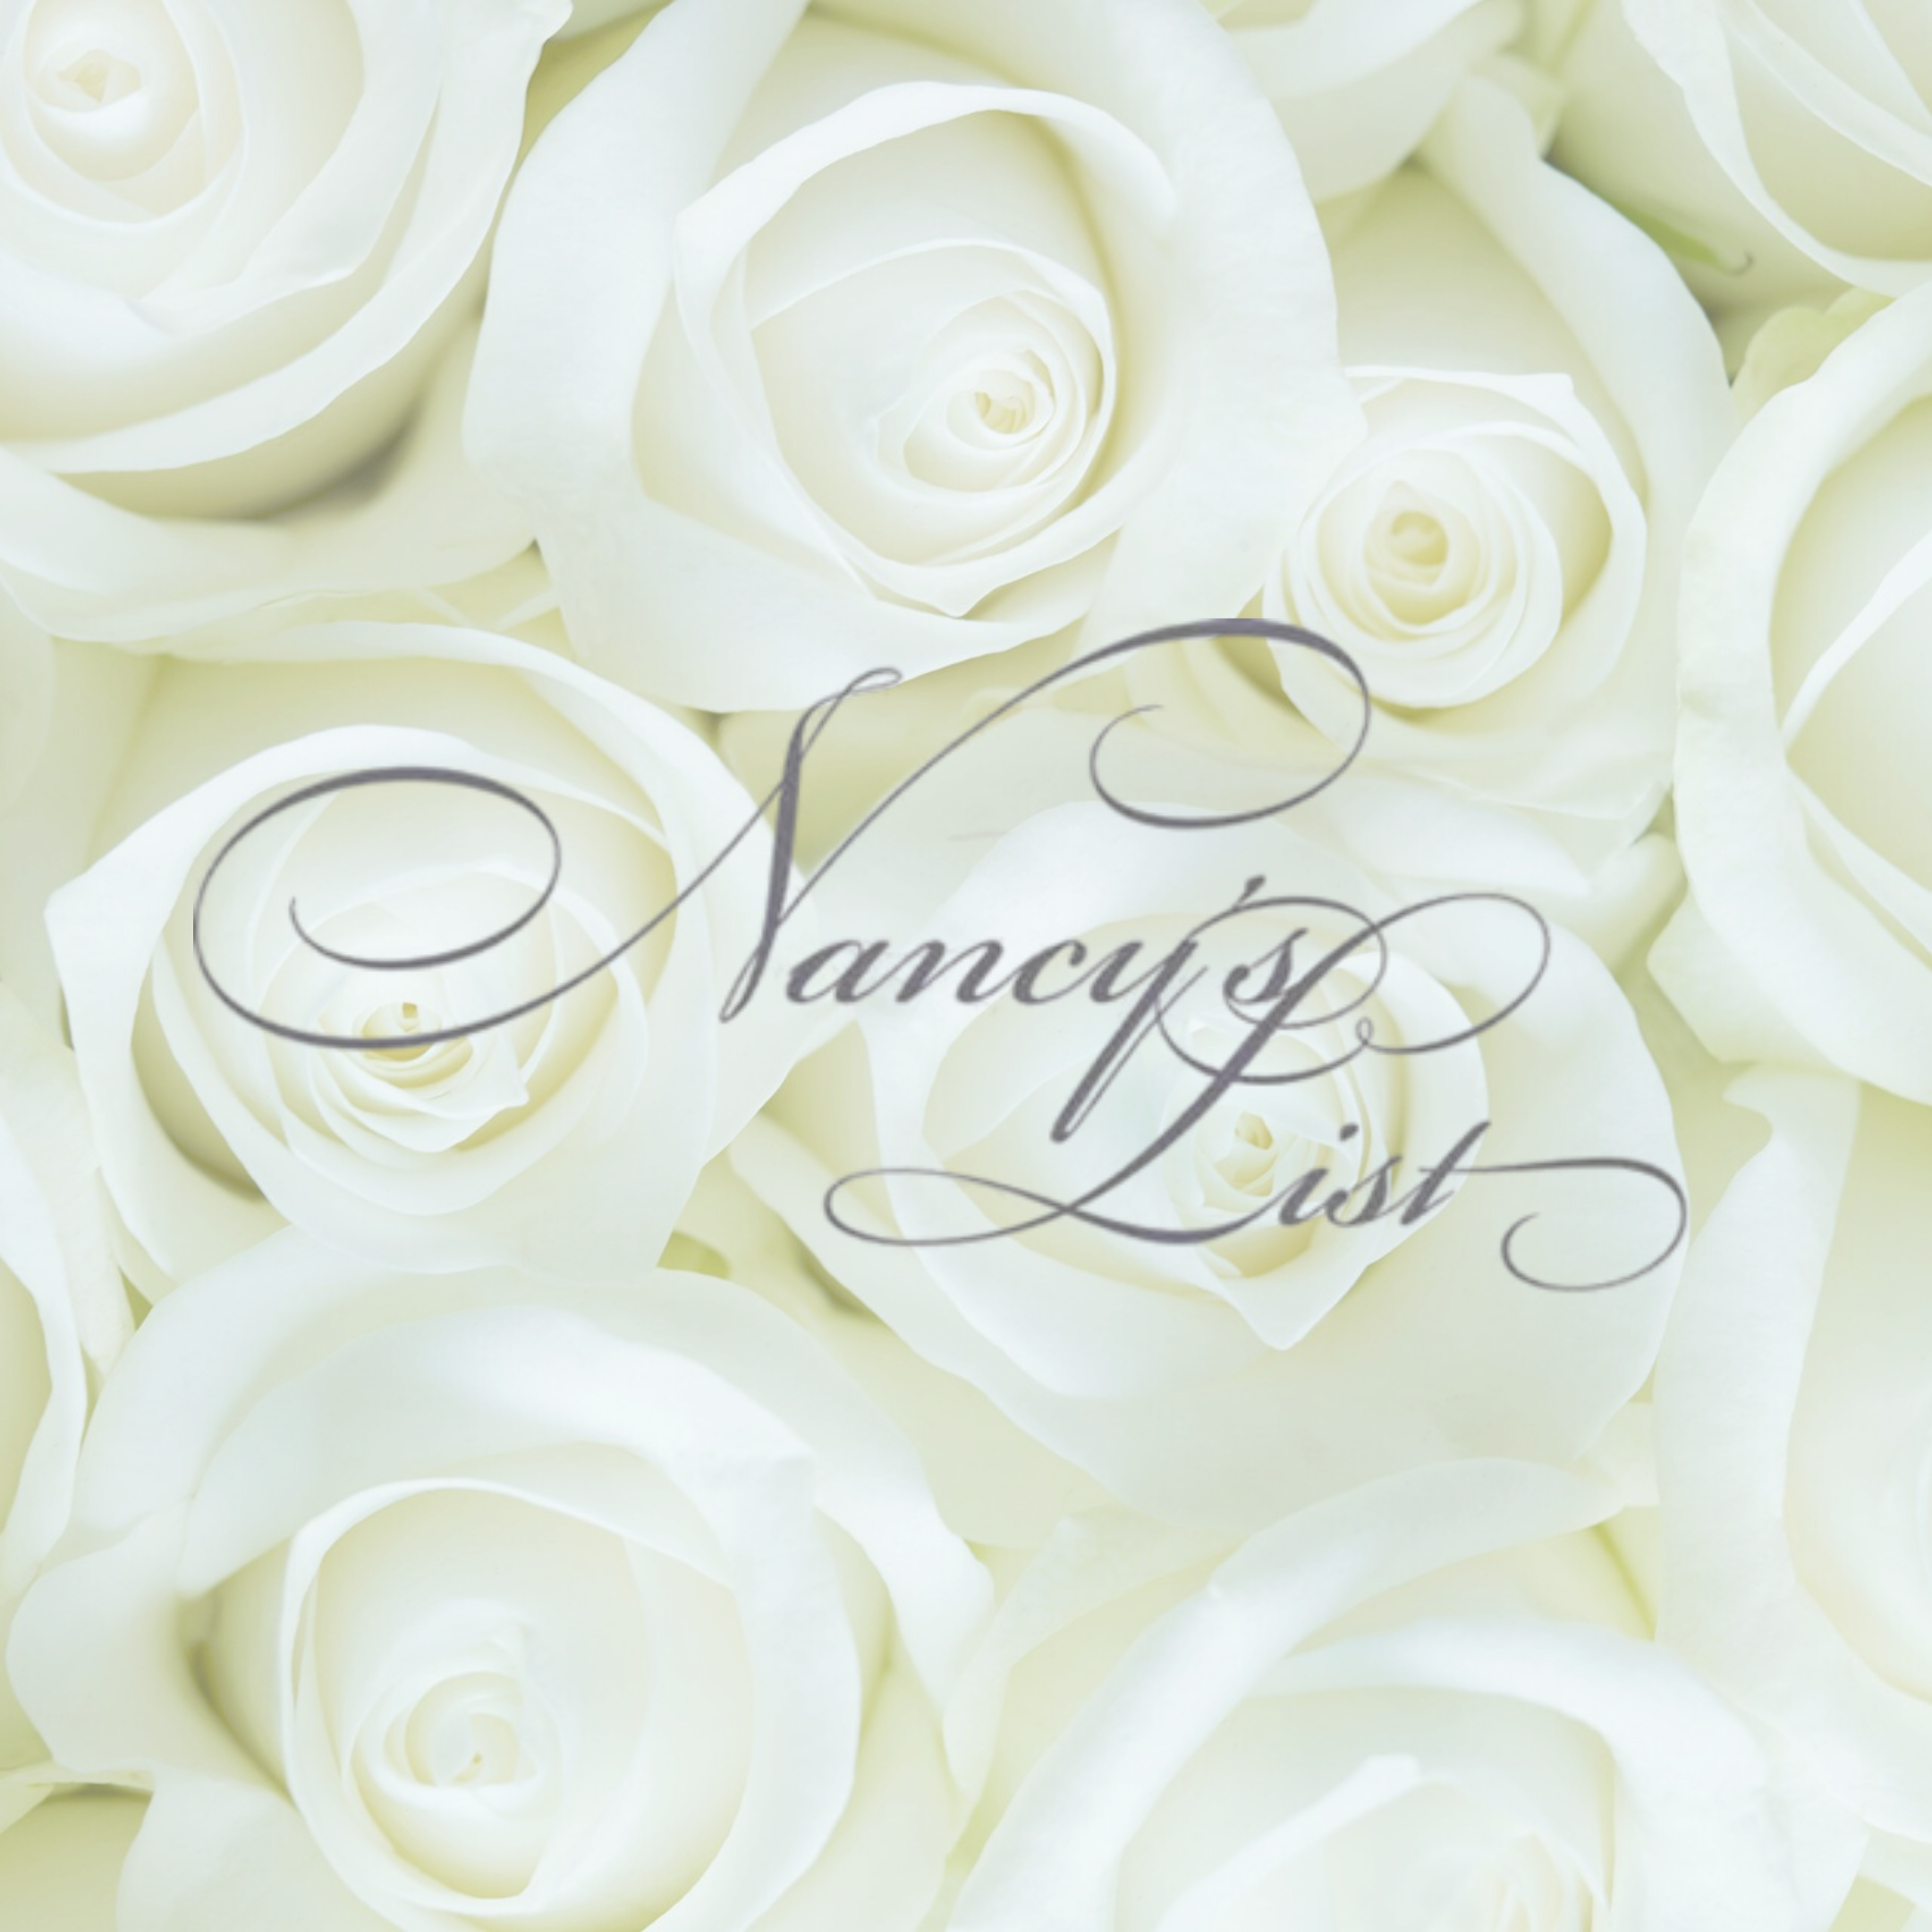 Nancy's List - Coping with Financial Stress for Cancer Patients and Their Families